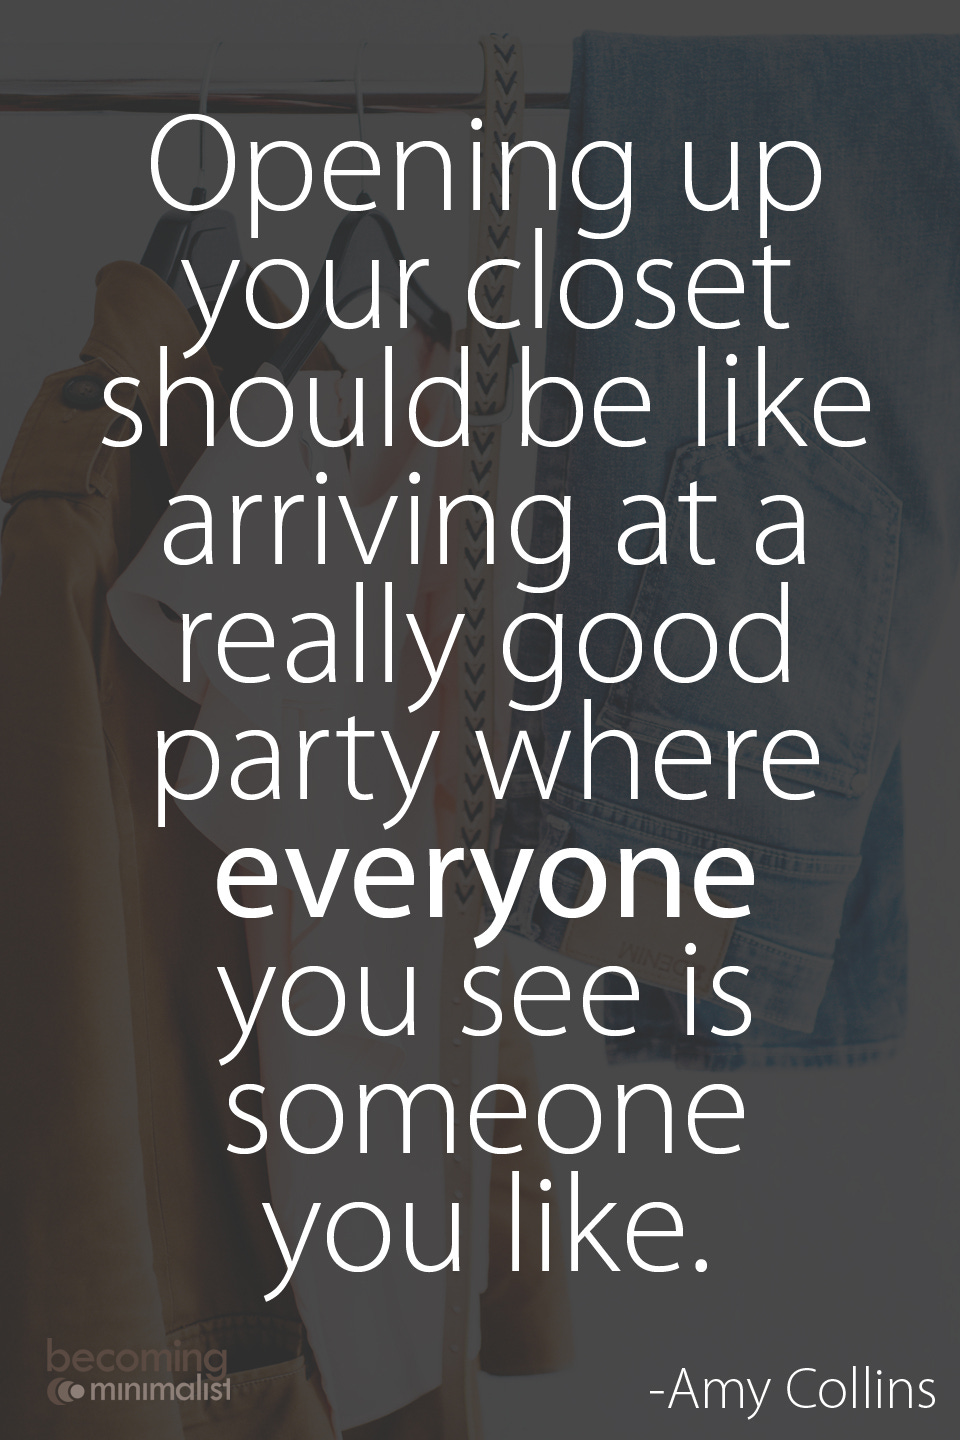 May be an image of text that says "Opening up your closet should be like arriving at a really good party where everyone you see is someone you like. mınımalıst -Amy Collins"